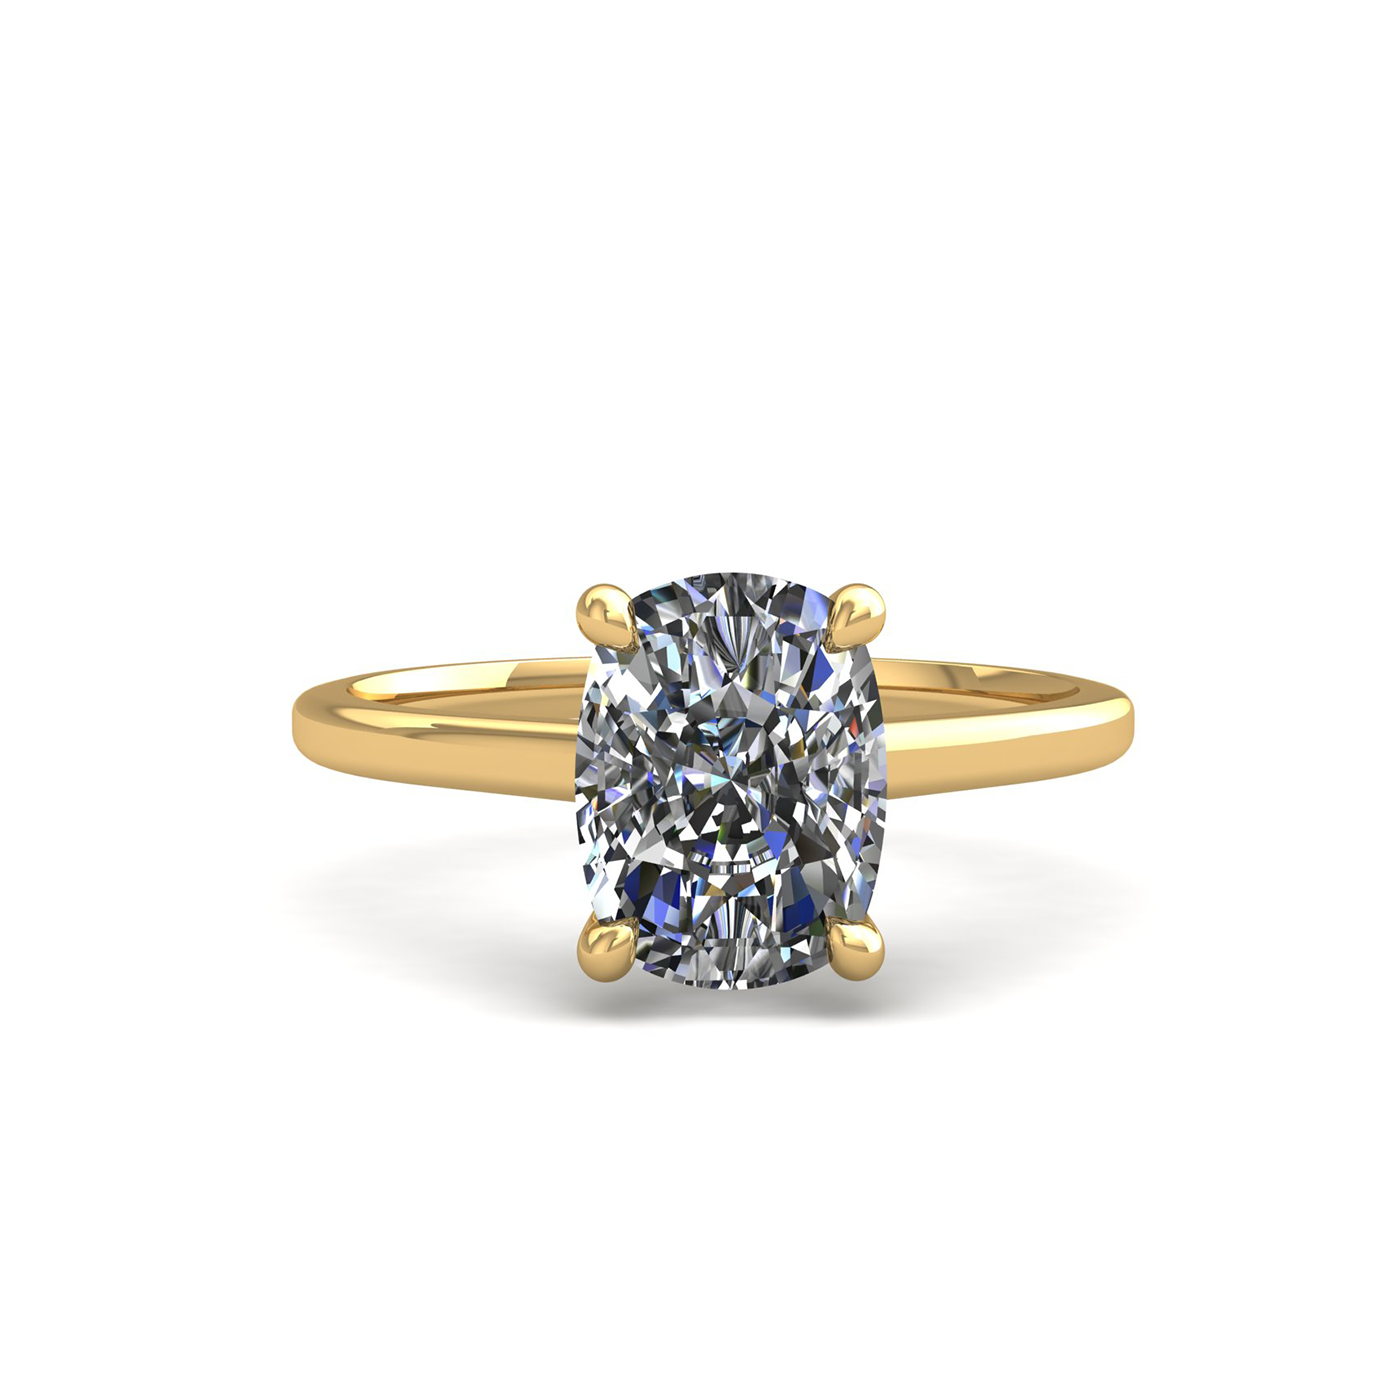 18k yellow gold 1,00 ct 4 prongs solitaire elongated cushion cut diamond engagement ring with whisper thin band Photos & images